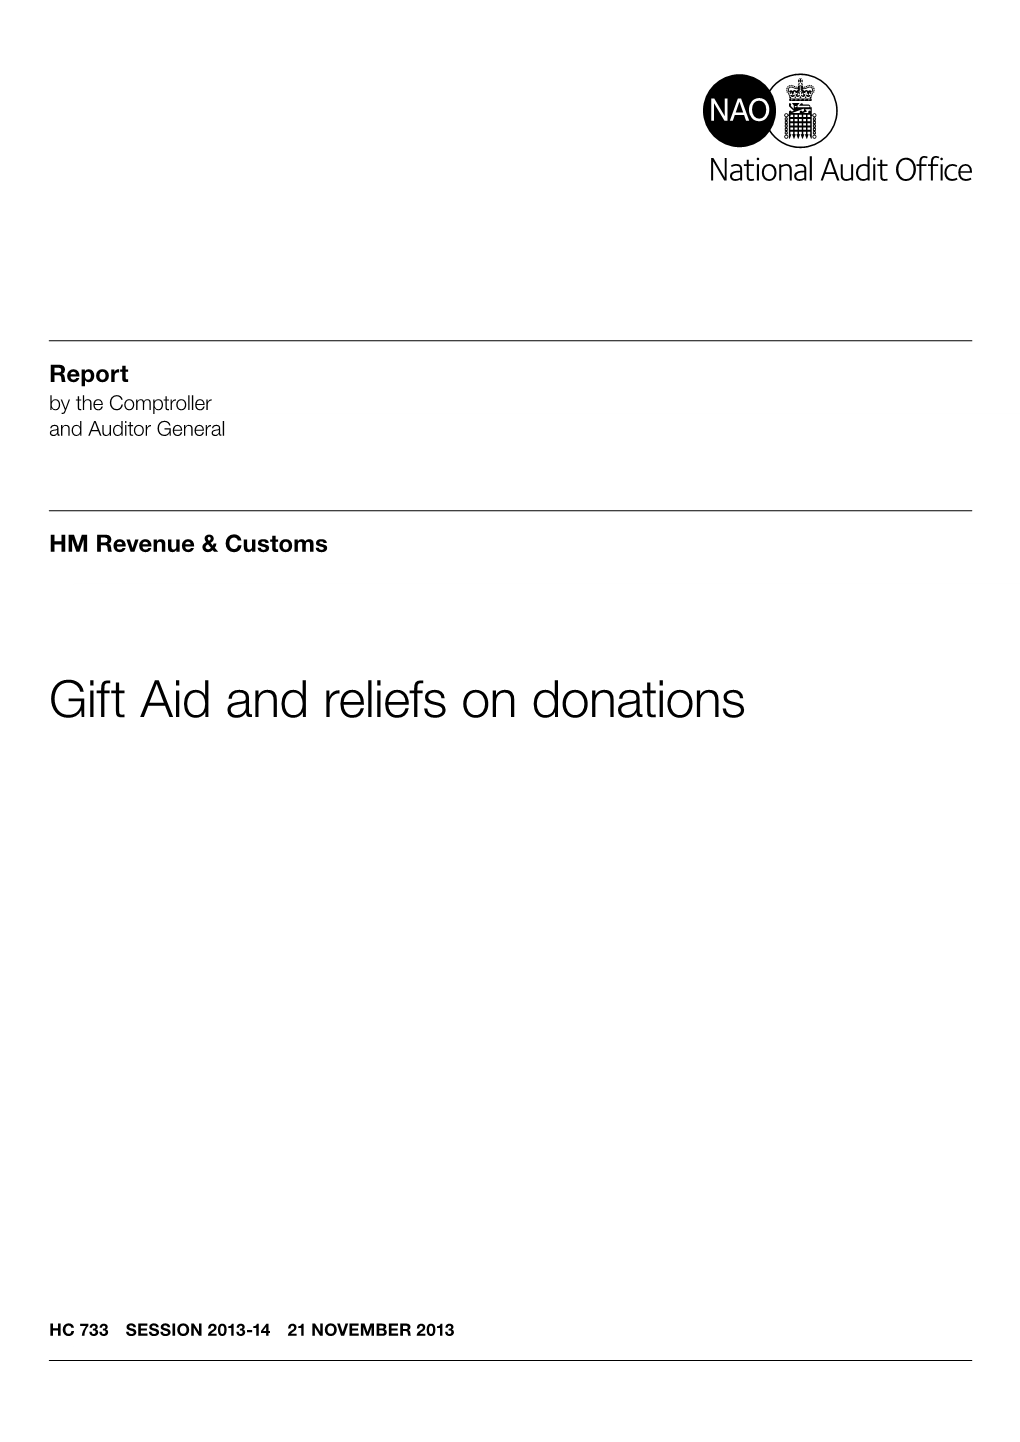 Gift Aid and Reliefs on Donations